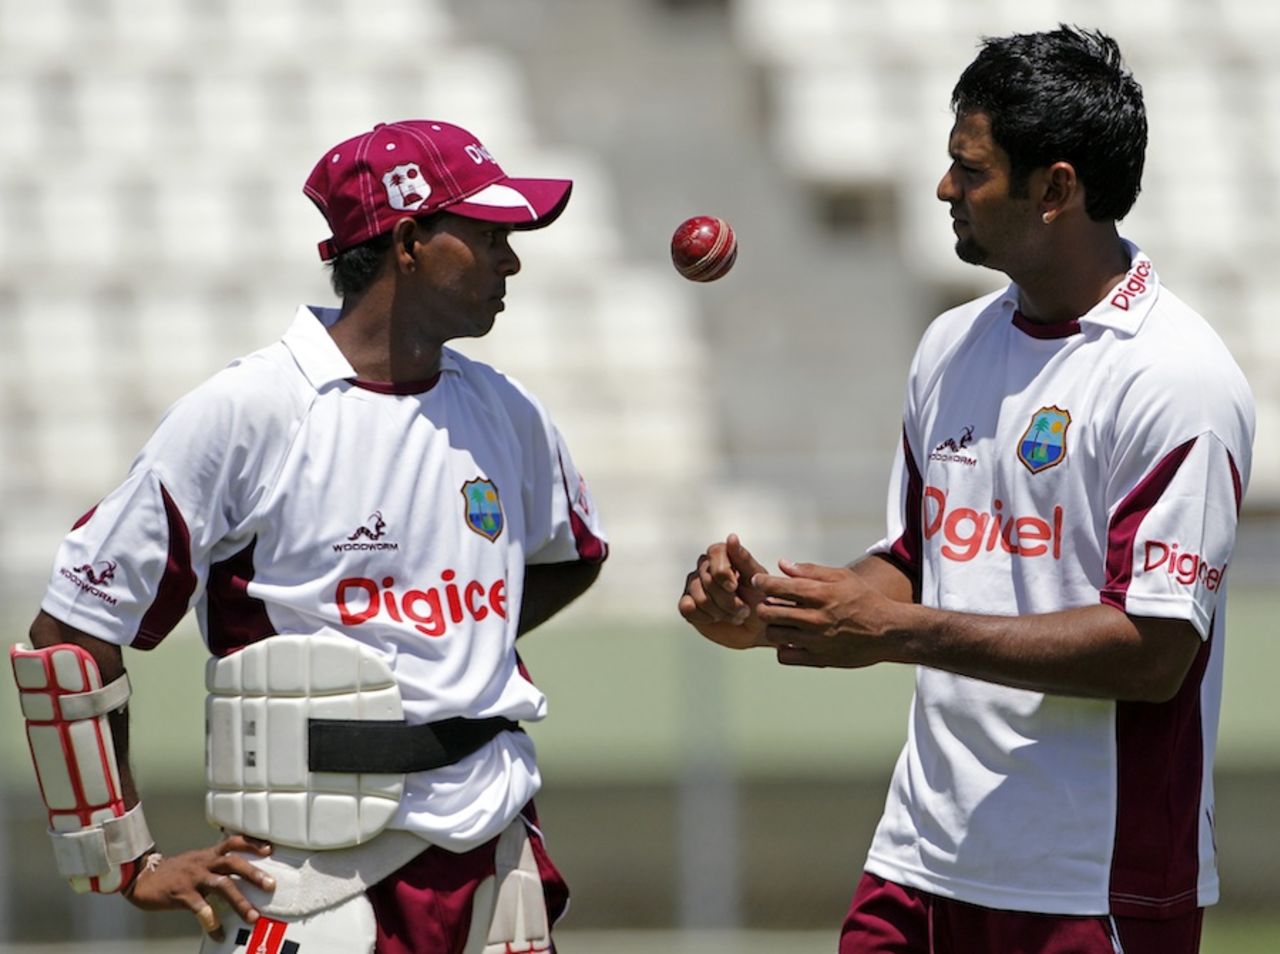 Shivnarine Chanderpaul chats with Assad Fudadin on the eve of the third Test against Australia, Roseau, Dominica, April 22, 2012